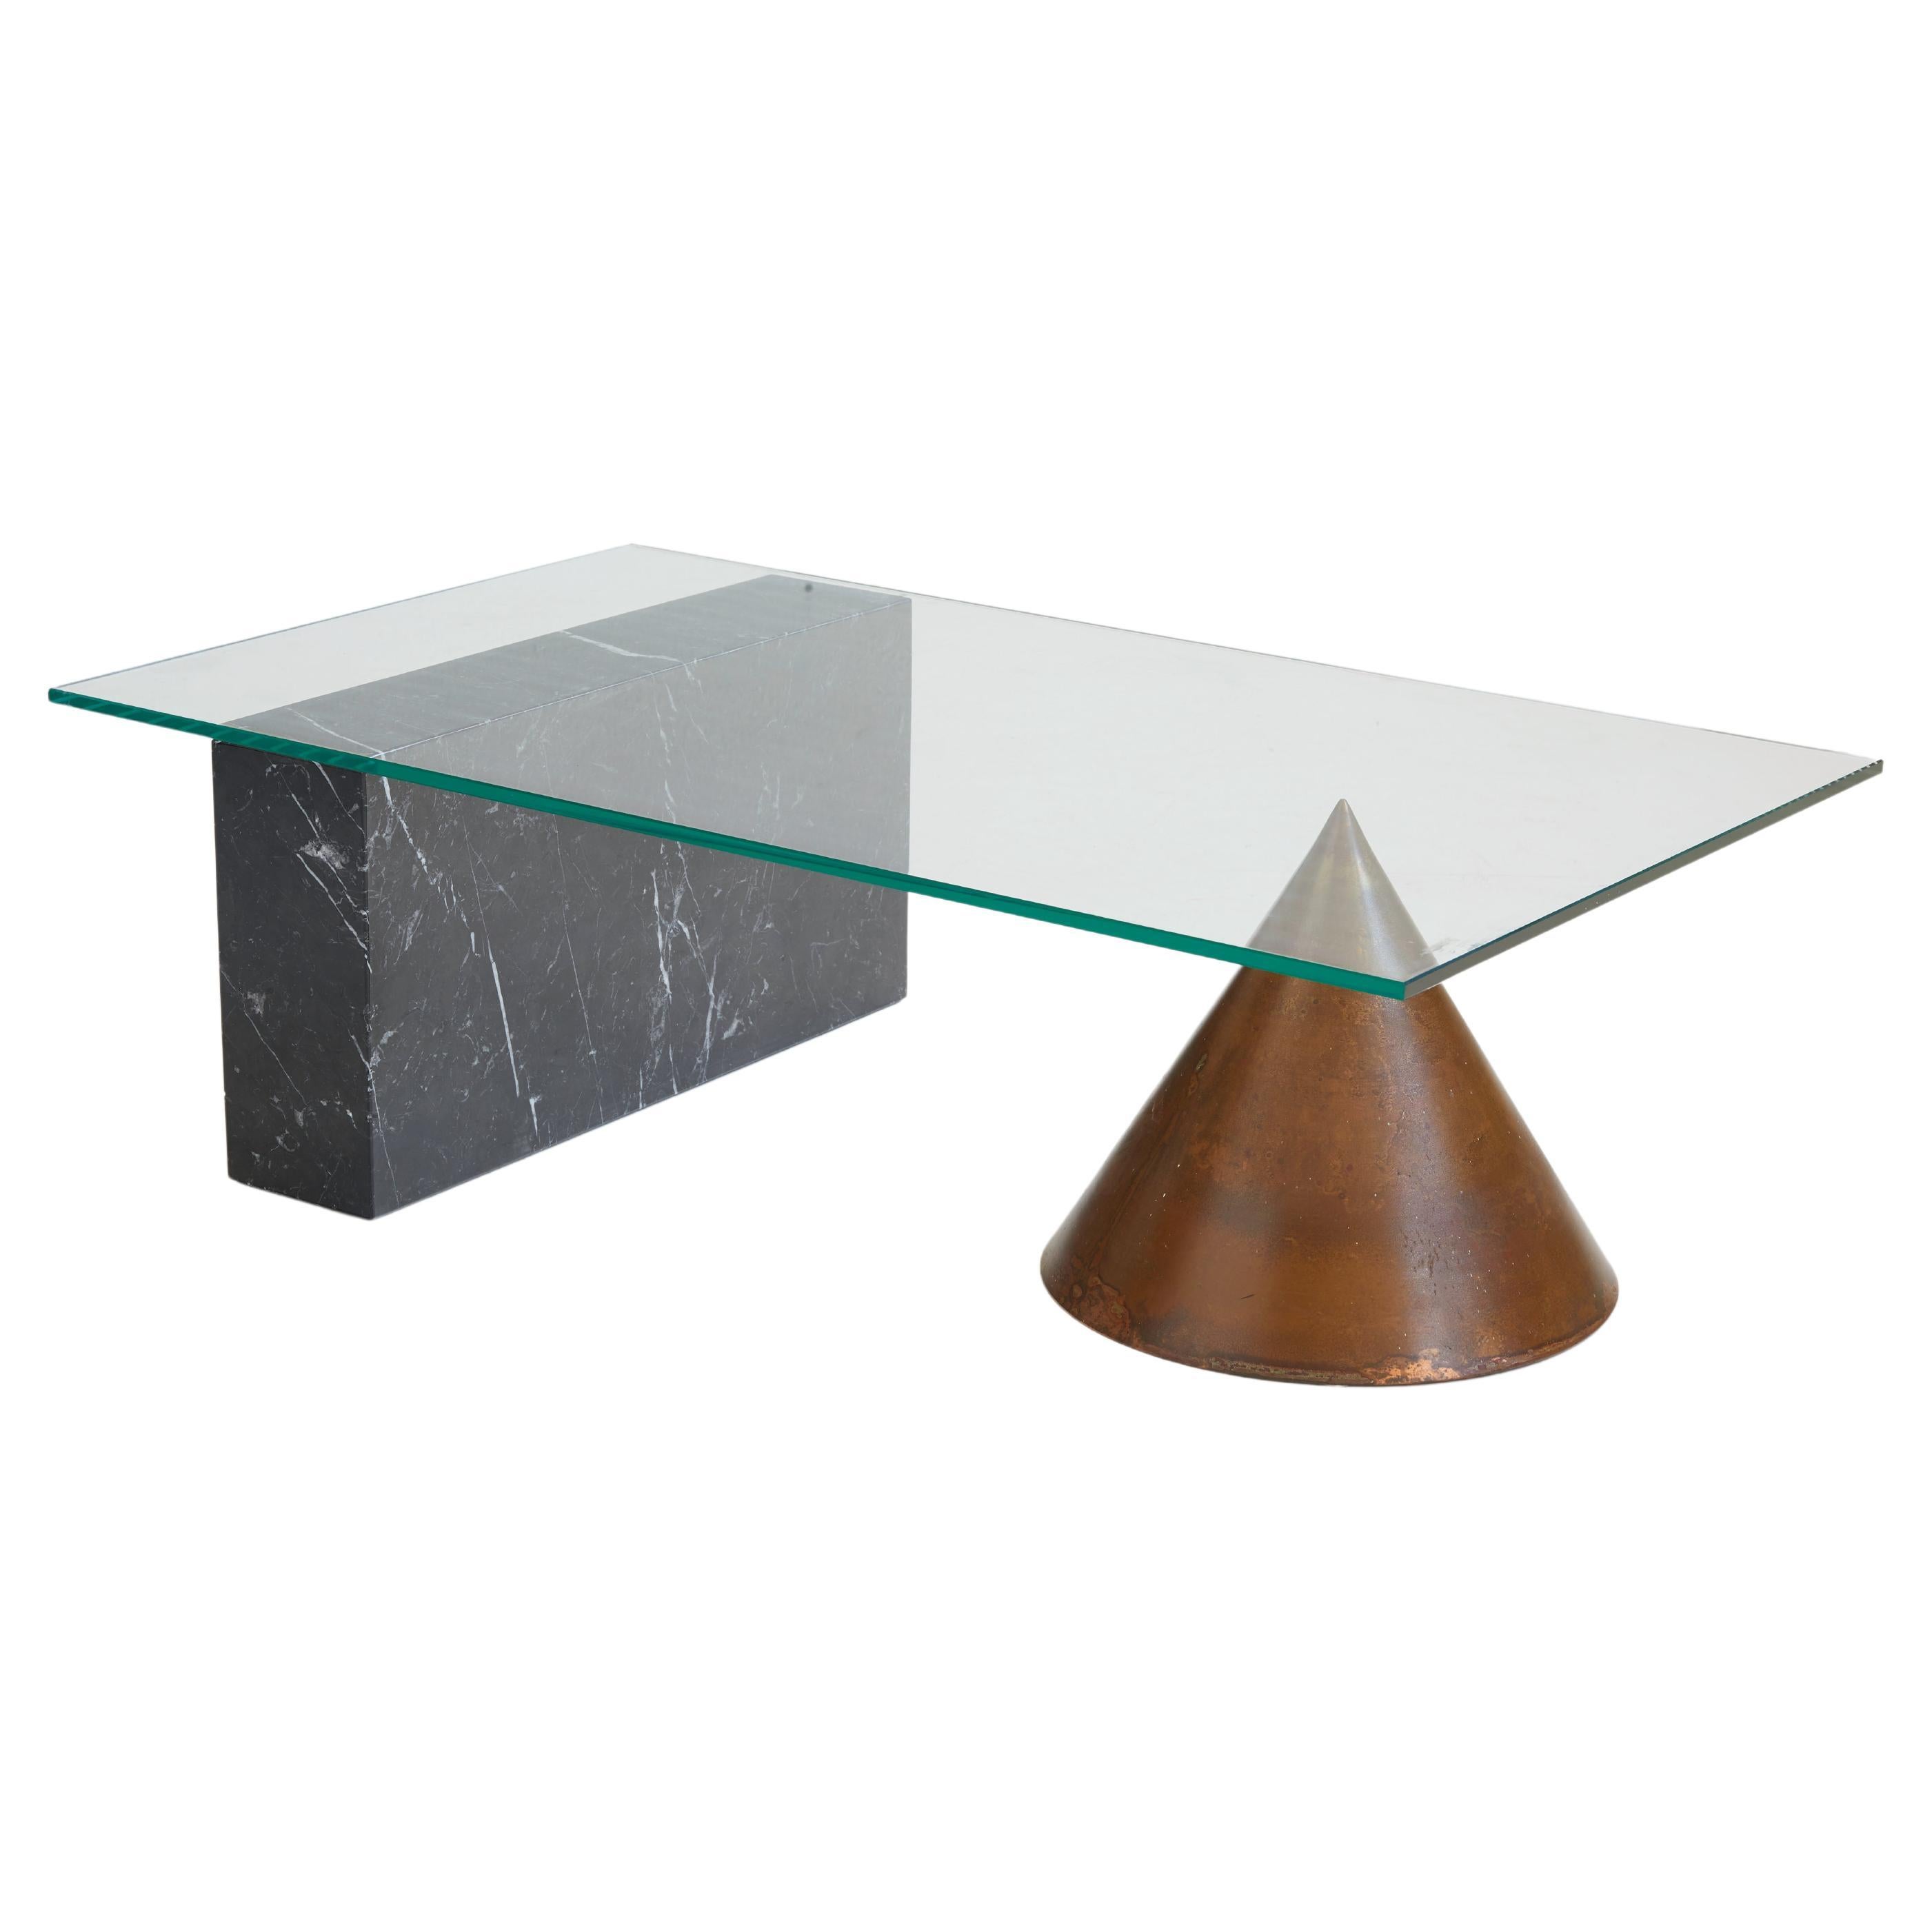 Iconic and rare Kono coffee table by Massimo and Lella Vignelli for Casigliani, Italy 1983.

This stunning piece marries contrasting geometrical shapes and materials with great finesse.

A sleek, rectangular block of Nero Marquina marble harmonizes